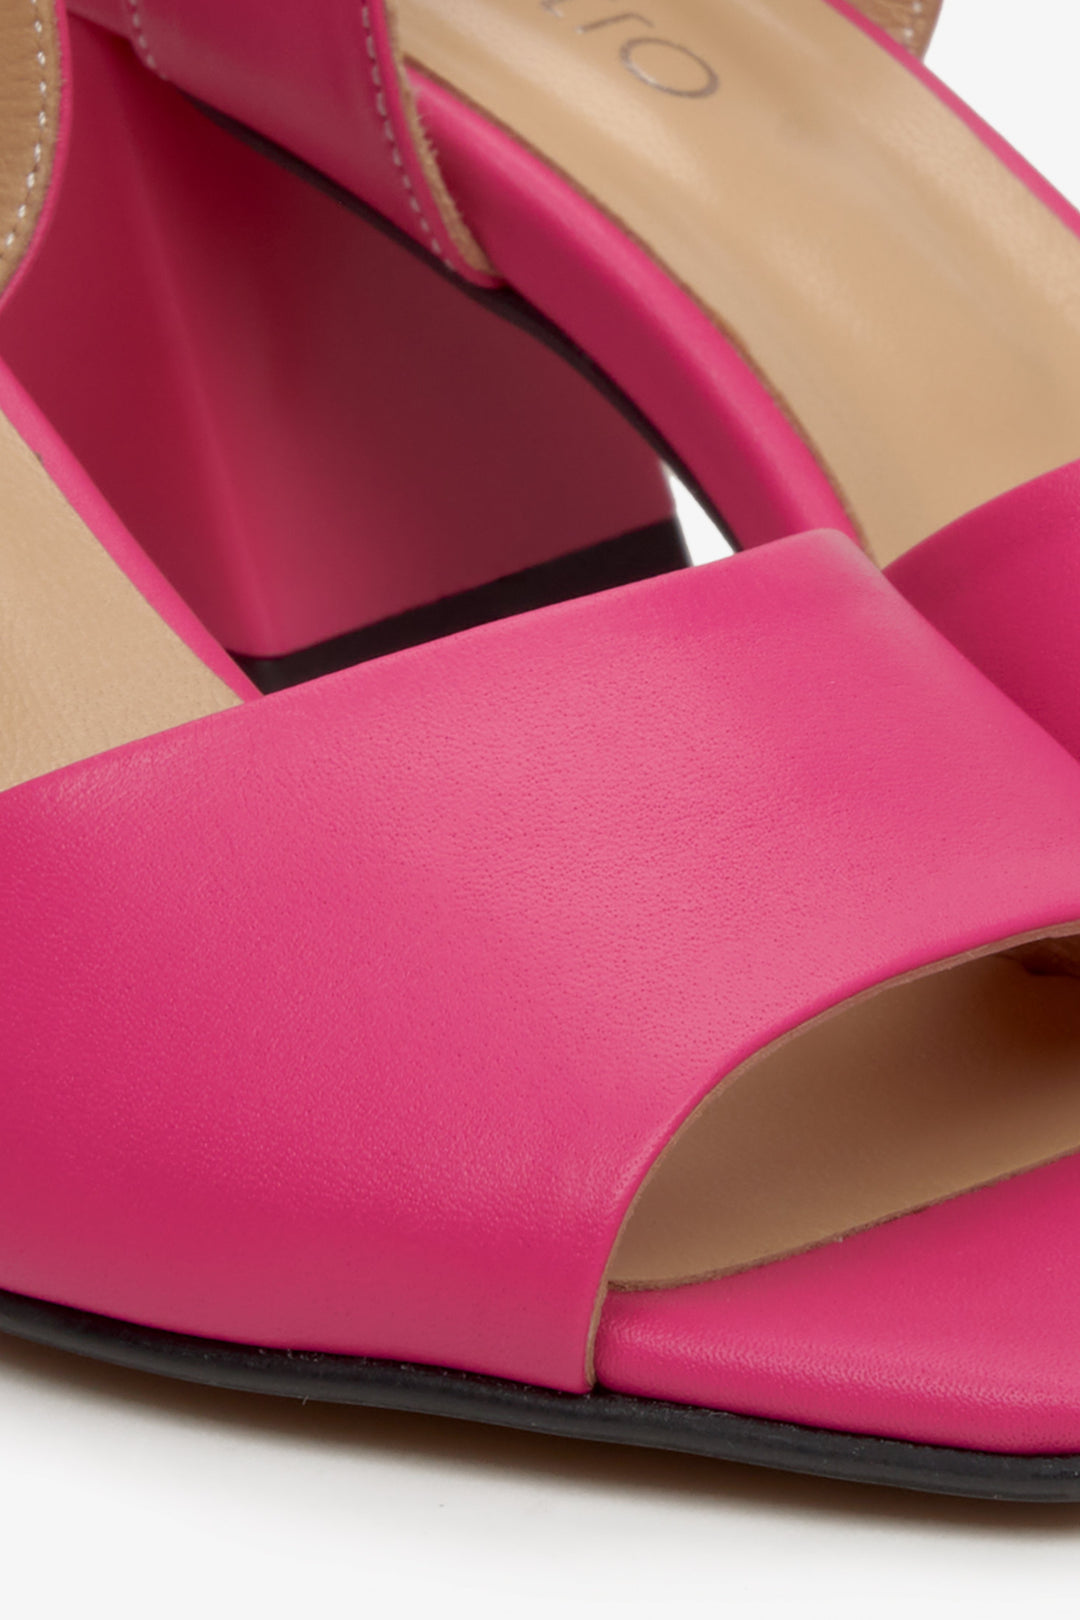 Women's pink leather heeled sandals by Estro - a close-up on the details.